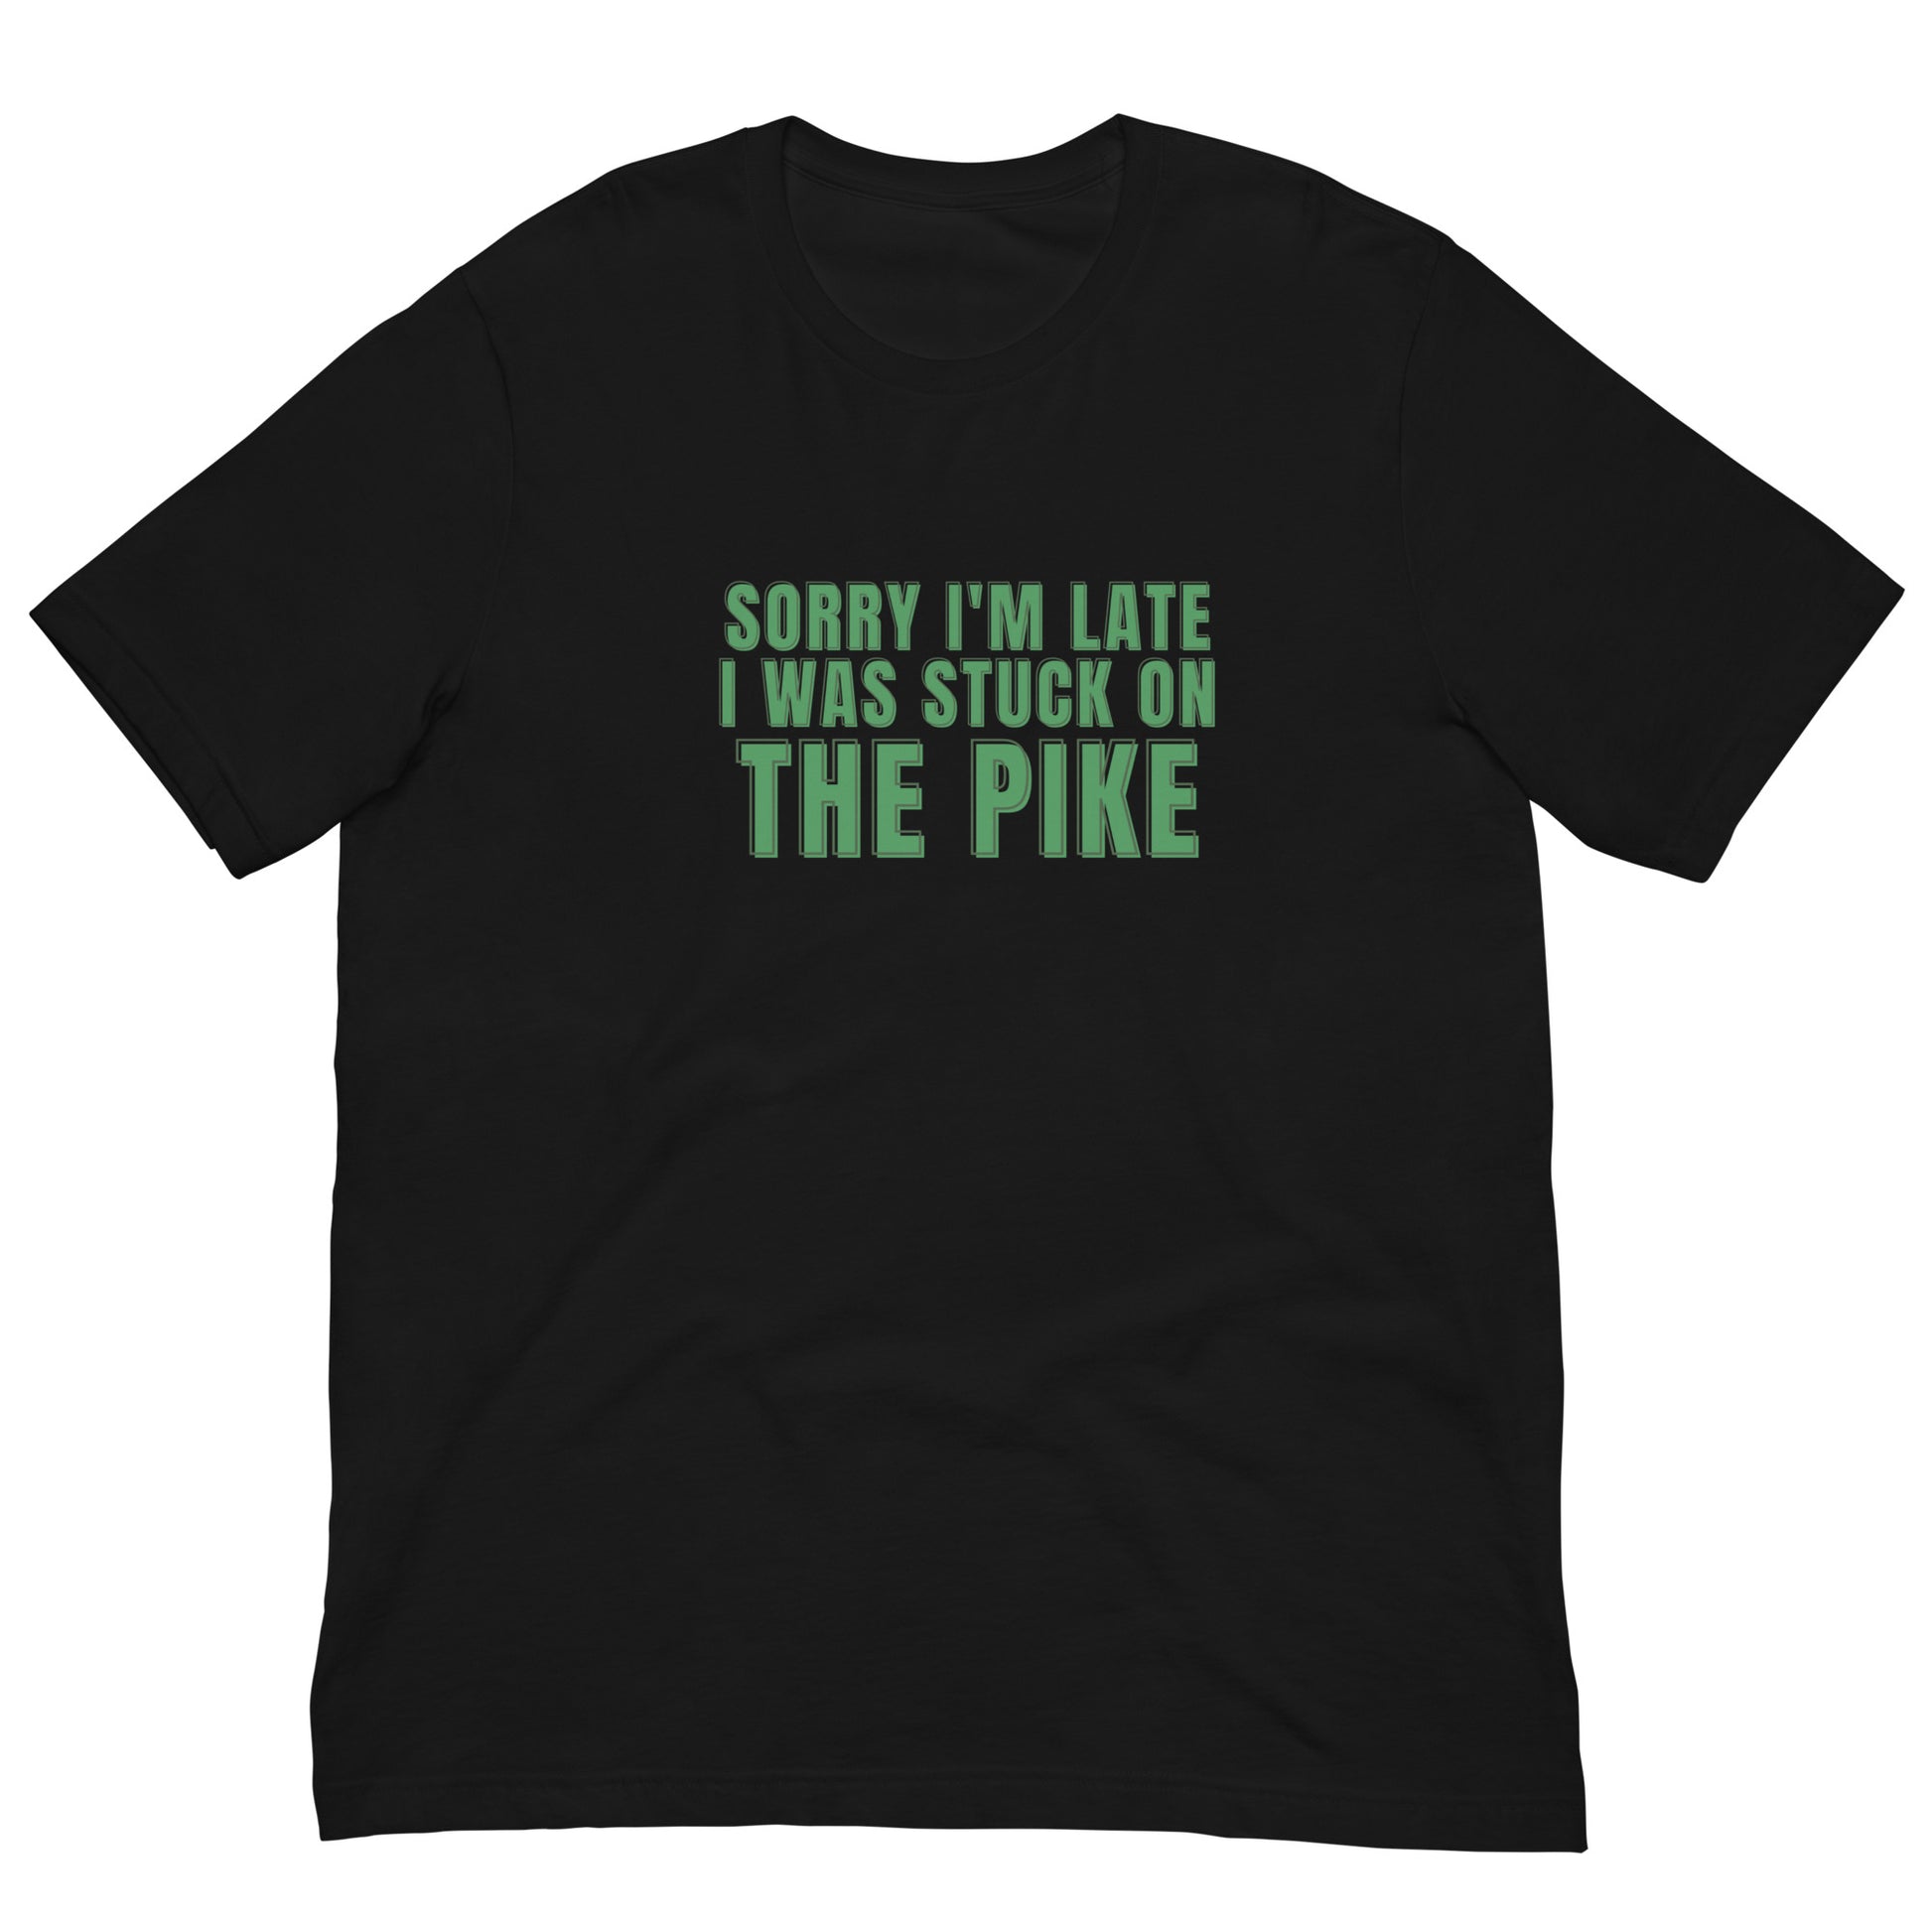 black tshirt that says "sorry i'm late i was stuck on the pike"